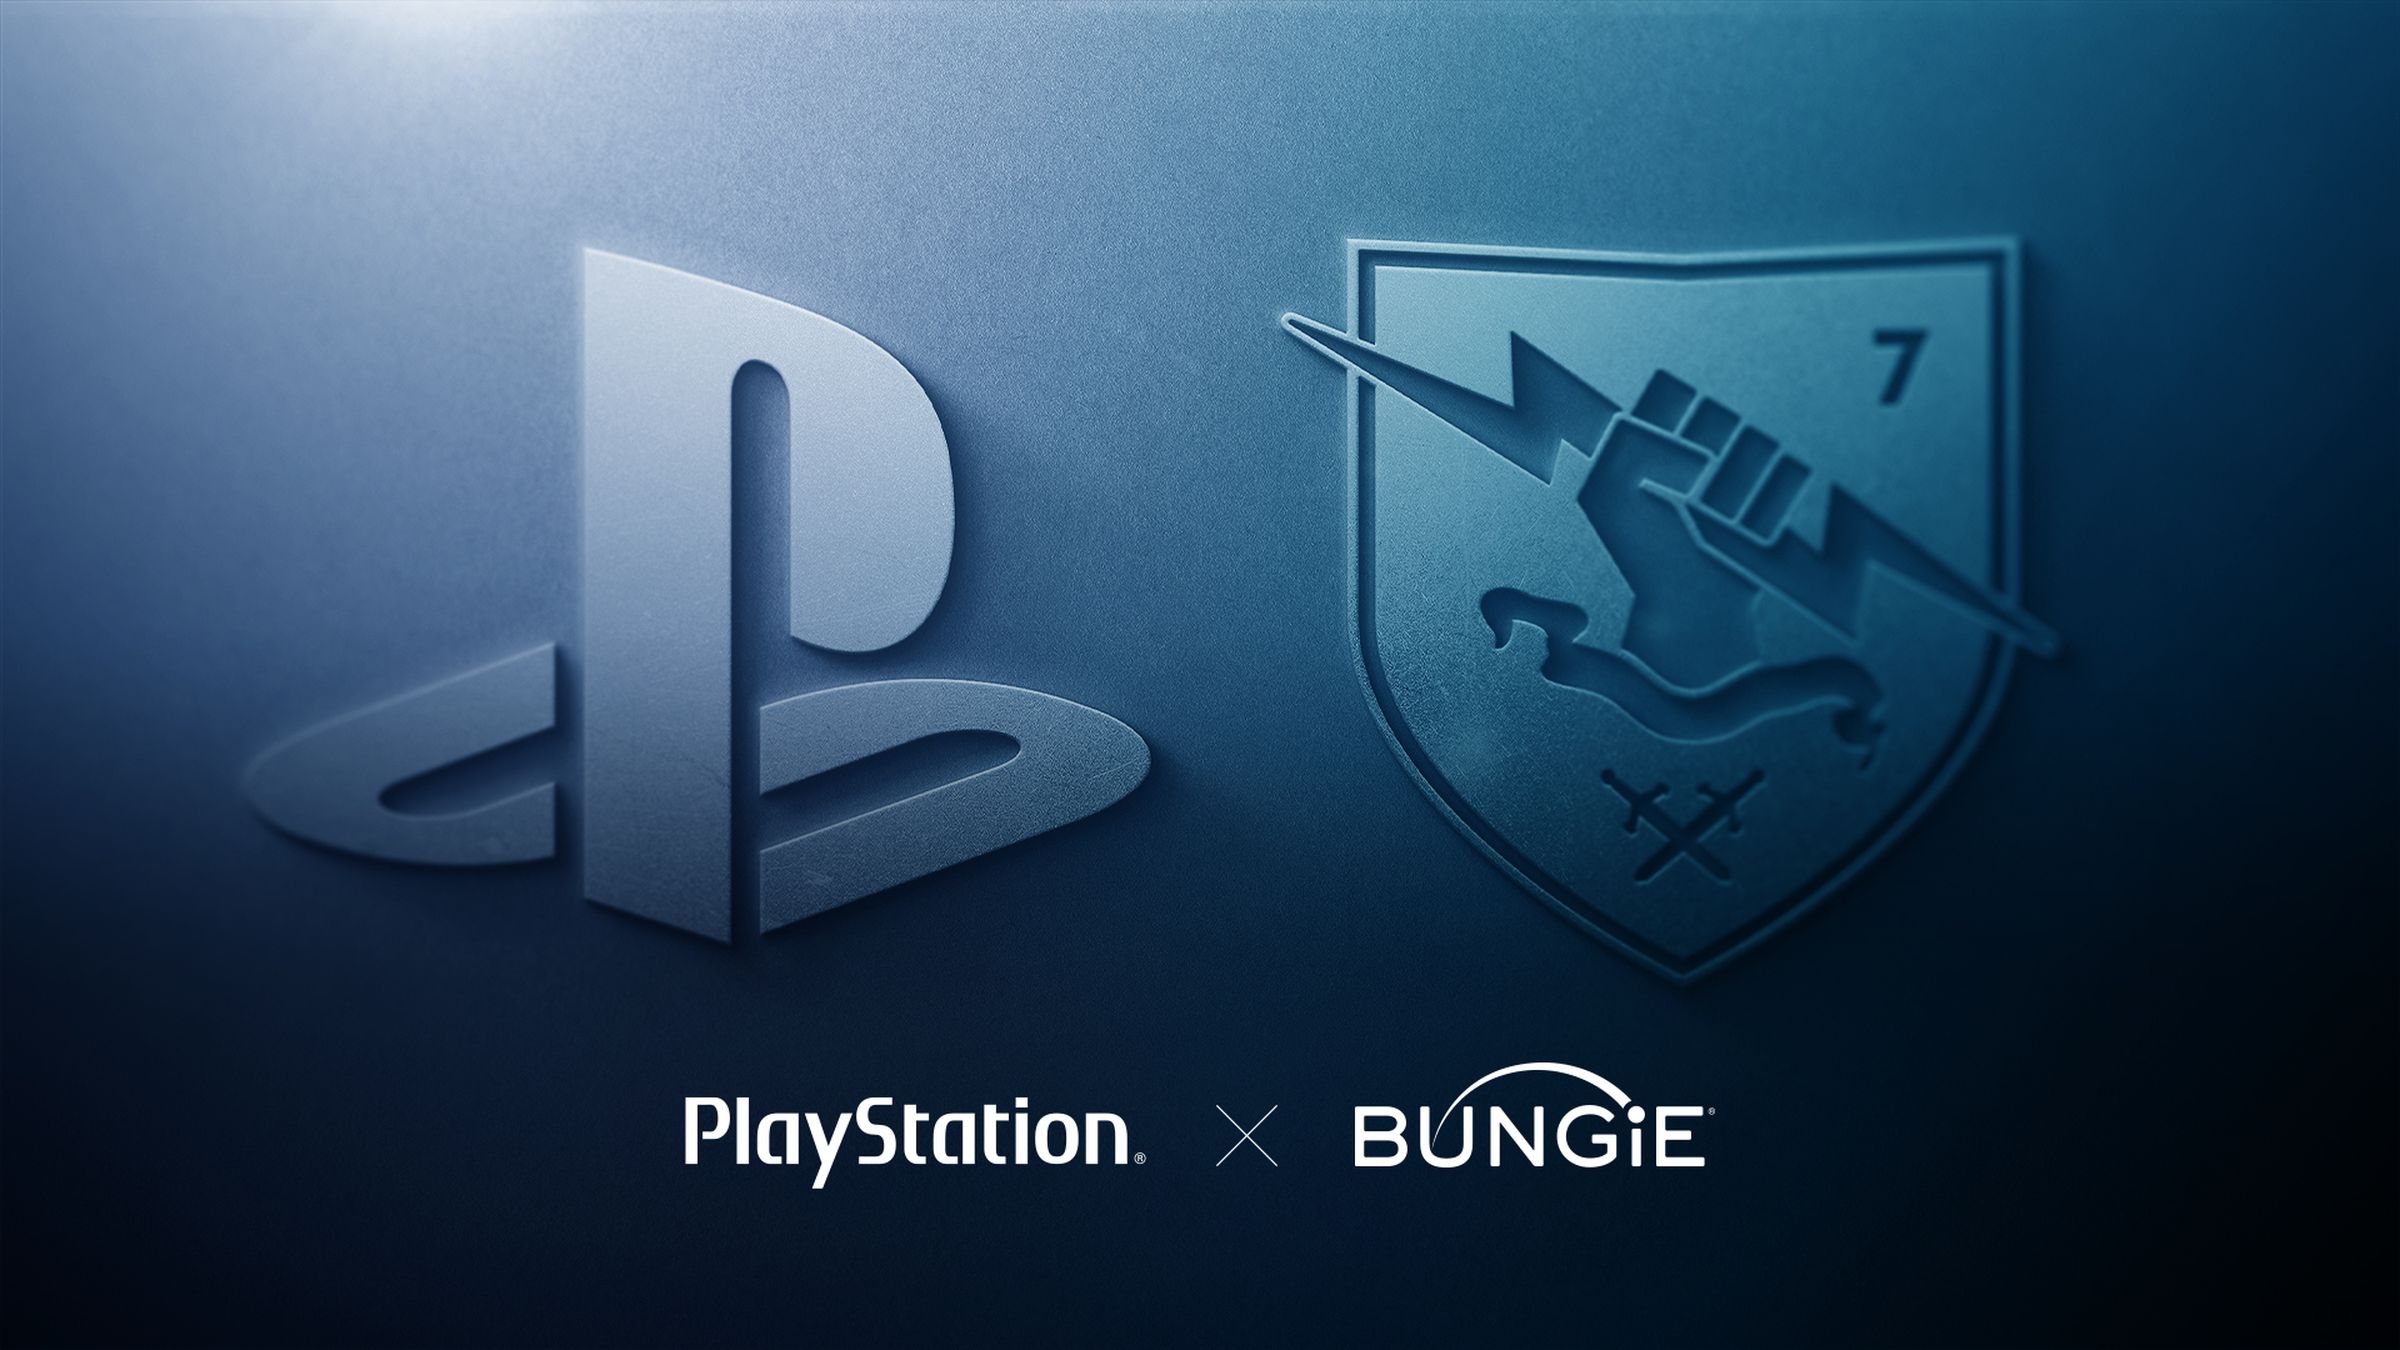 Sony recently completed its Bungie acquisition.